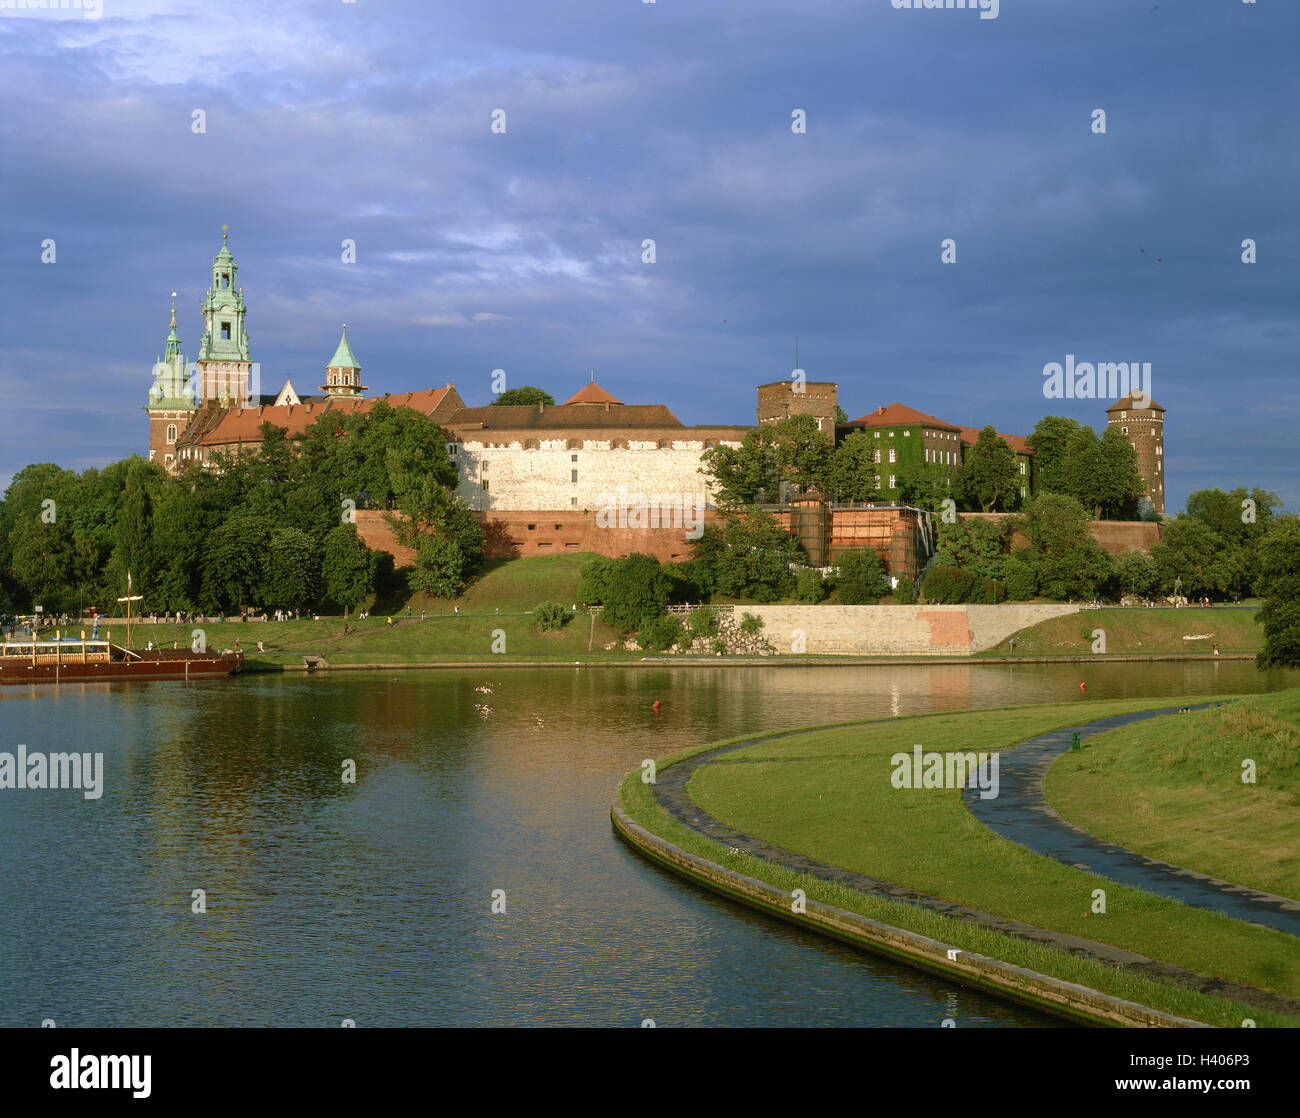 Poland, Cracow, Wawel, lock, church, morello, Europe, East Europe, Poland, Cracow, town, castle mountain, Wawel hill, royal castle, cathedral, River, Wisla, place of interest, culture, tourism, summer, Stock Photo